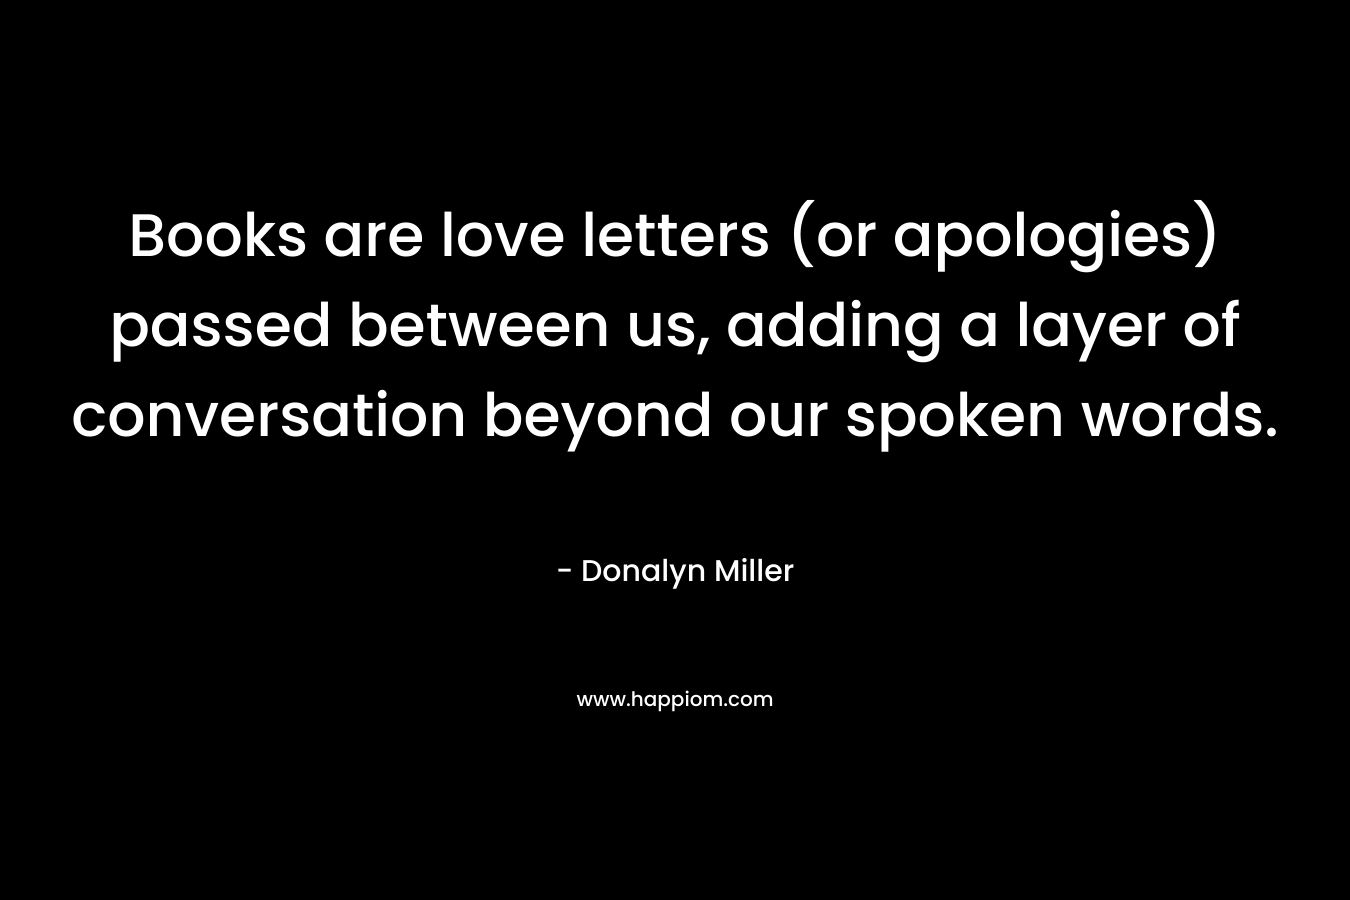 Books are love letters (or apologies) passed between us, adding a layer of conversation beyond our spoken words. – Donalyn Miller